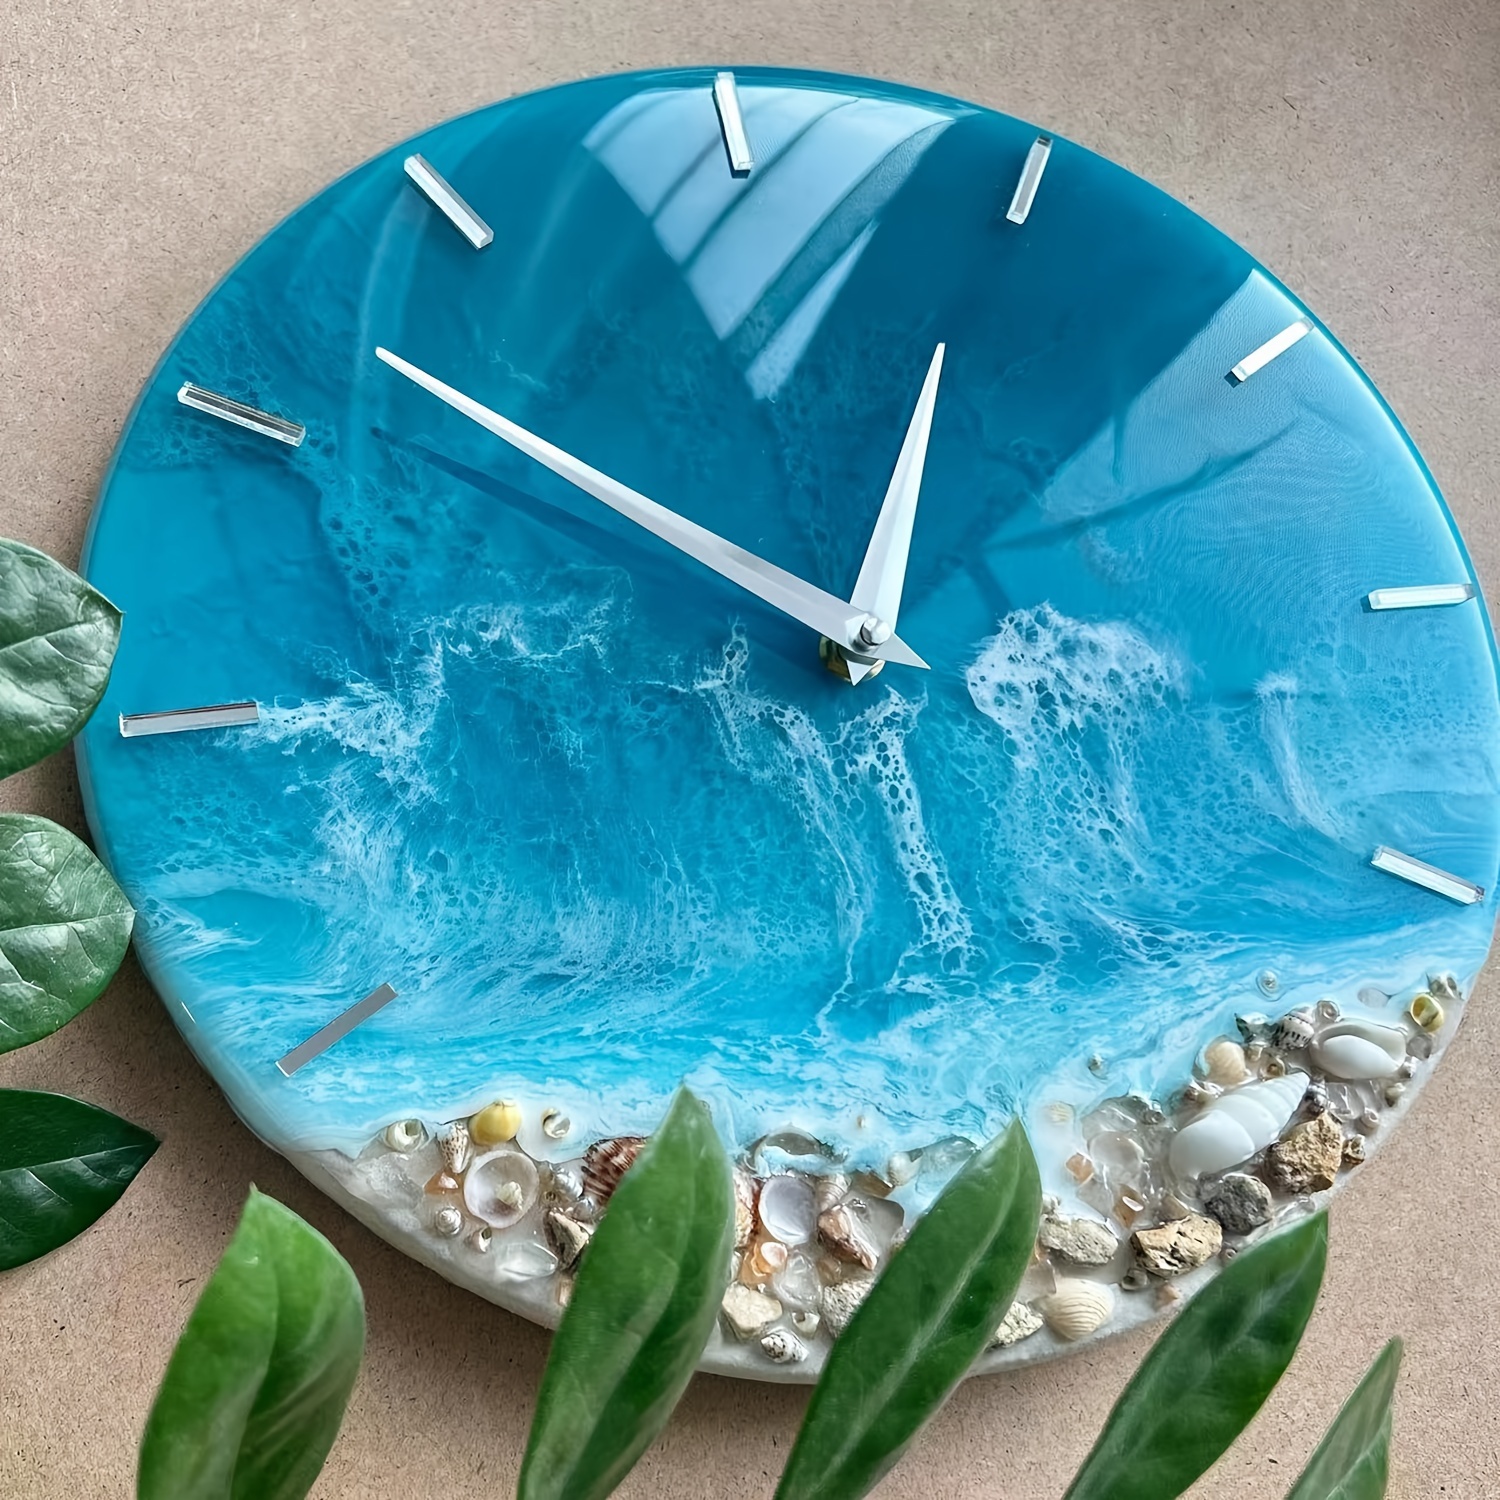 

1pc Diy Round Clock Resin Mold Silicone Casting Epoxy Resin Mold Large Size Clock Silicone Mold For Handmade Diy Crafts Making Home Decorations Handmade Craft Perfect For Gift Classroom Essentials